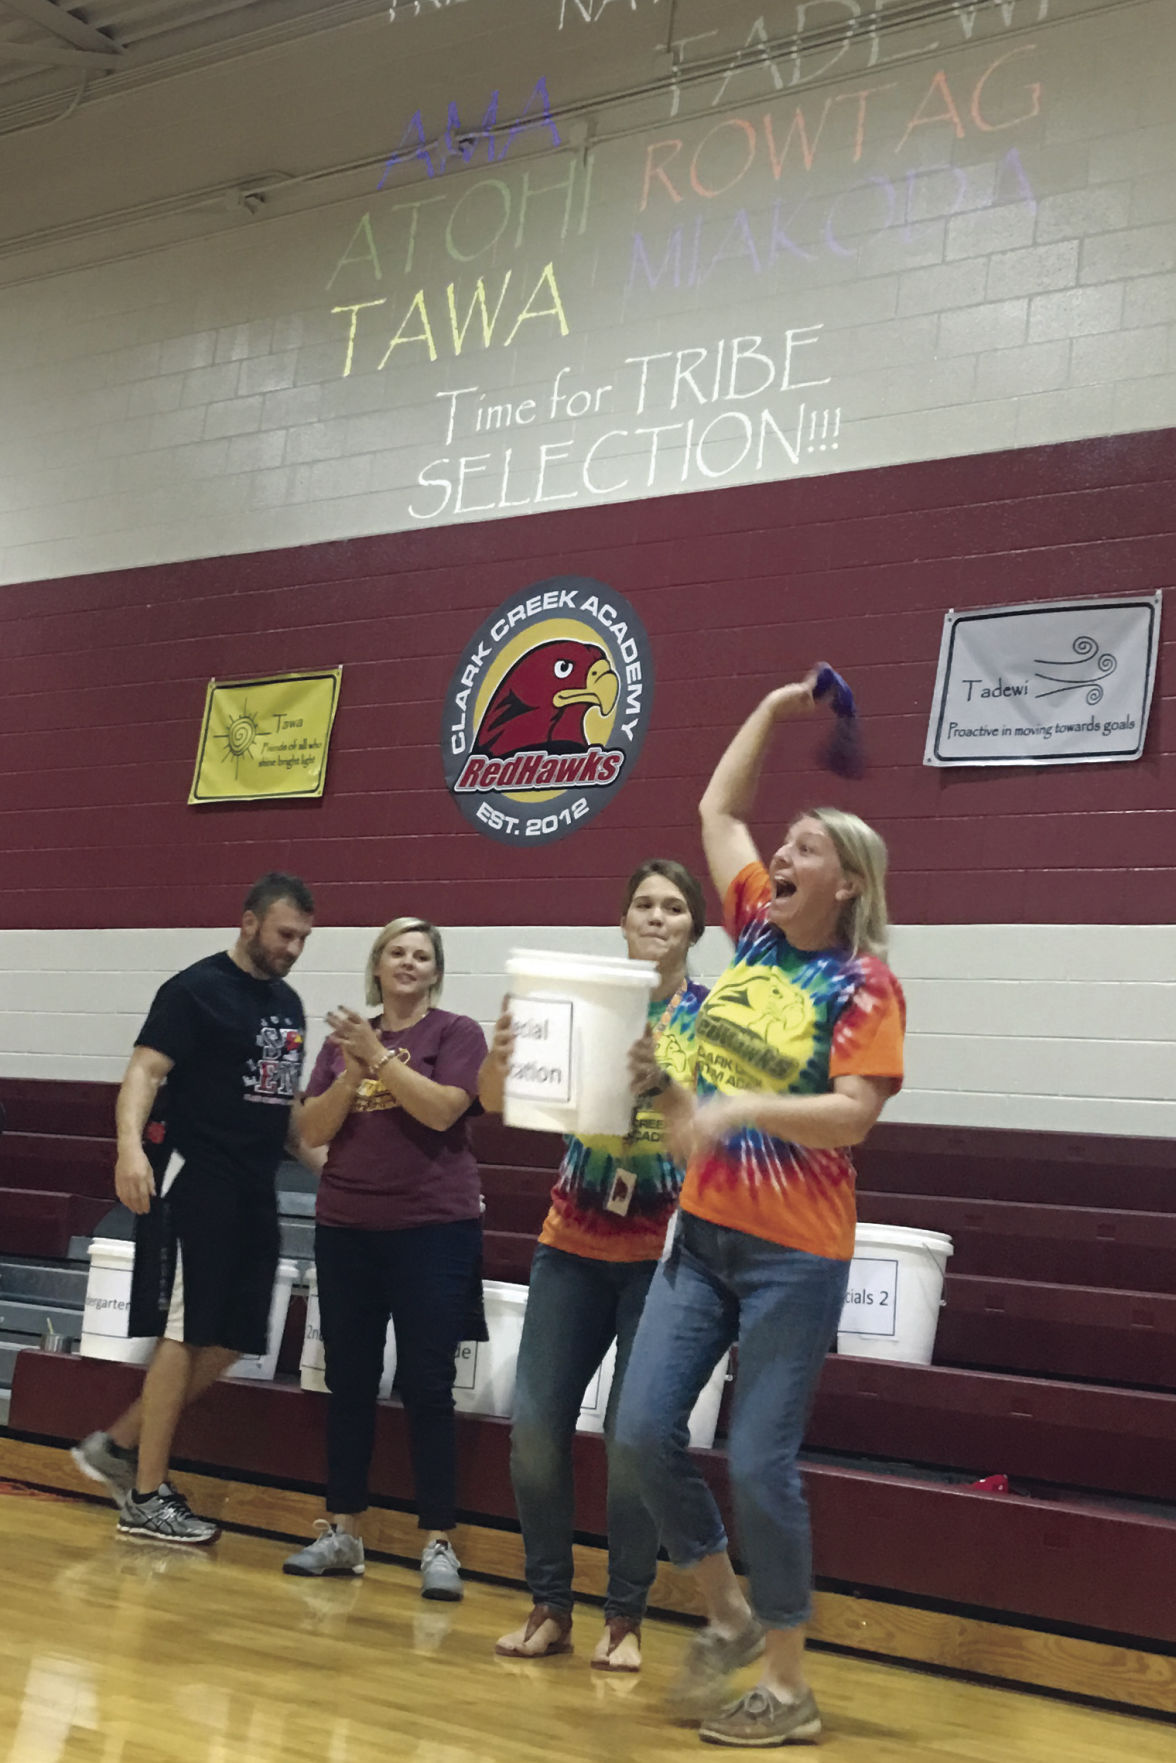 Clark Creek students kick off school year with annual Tribal